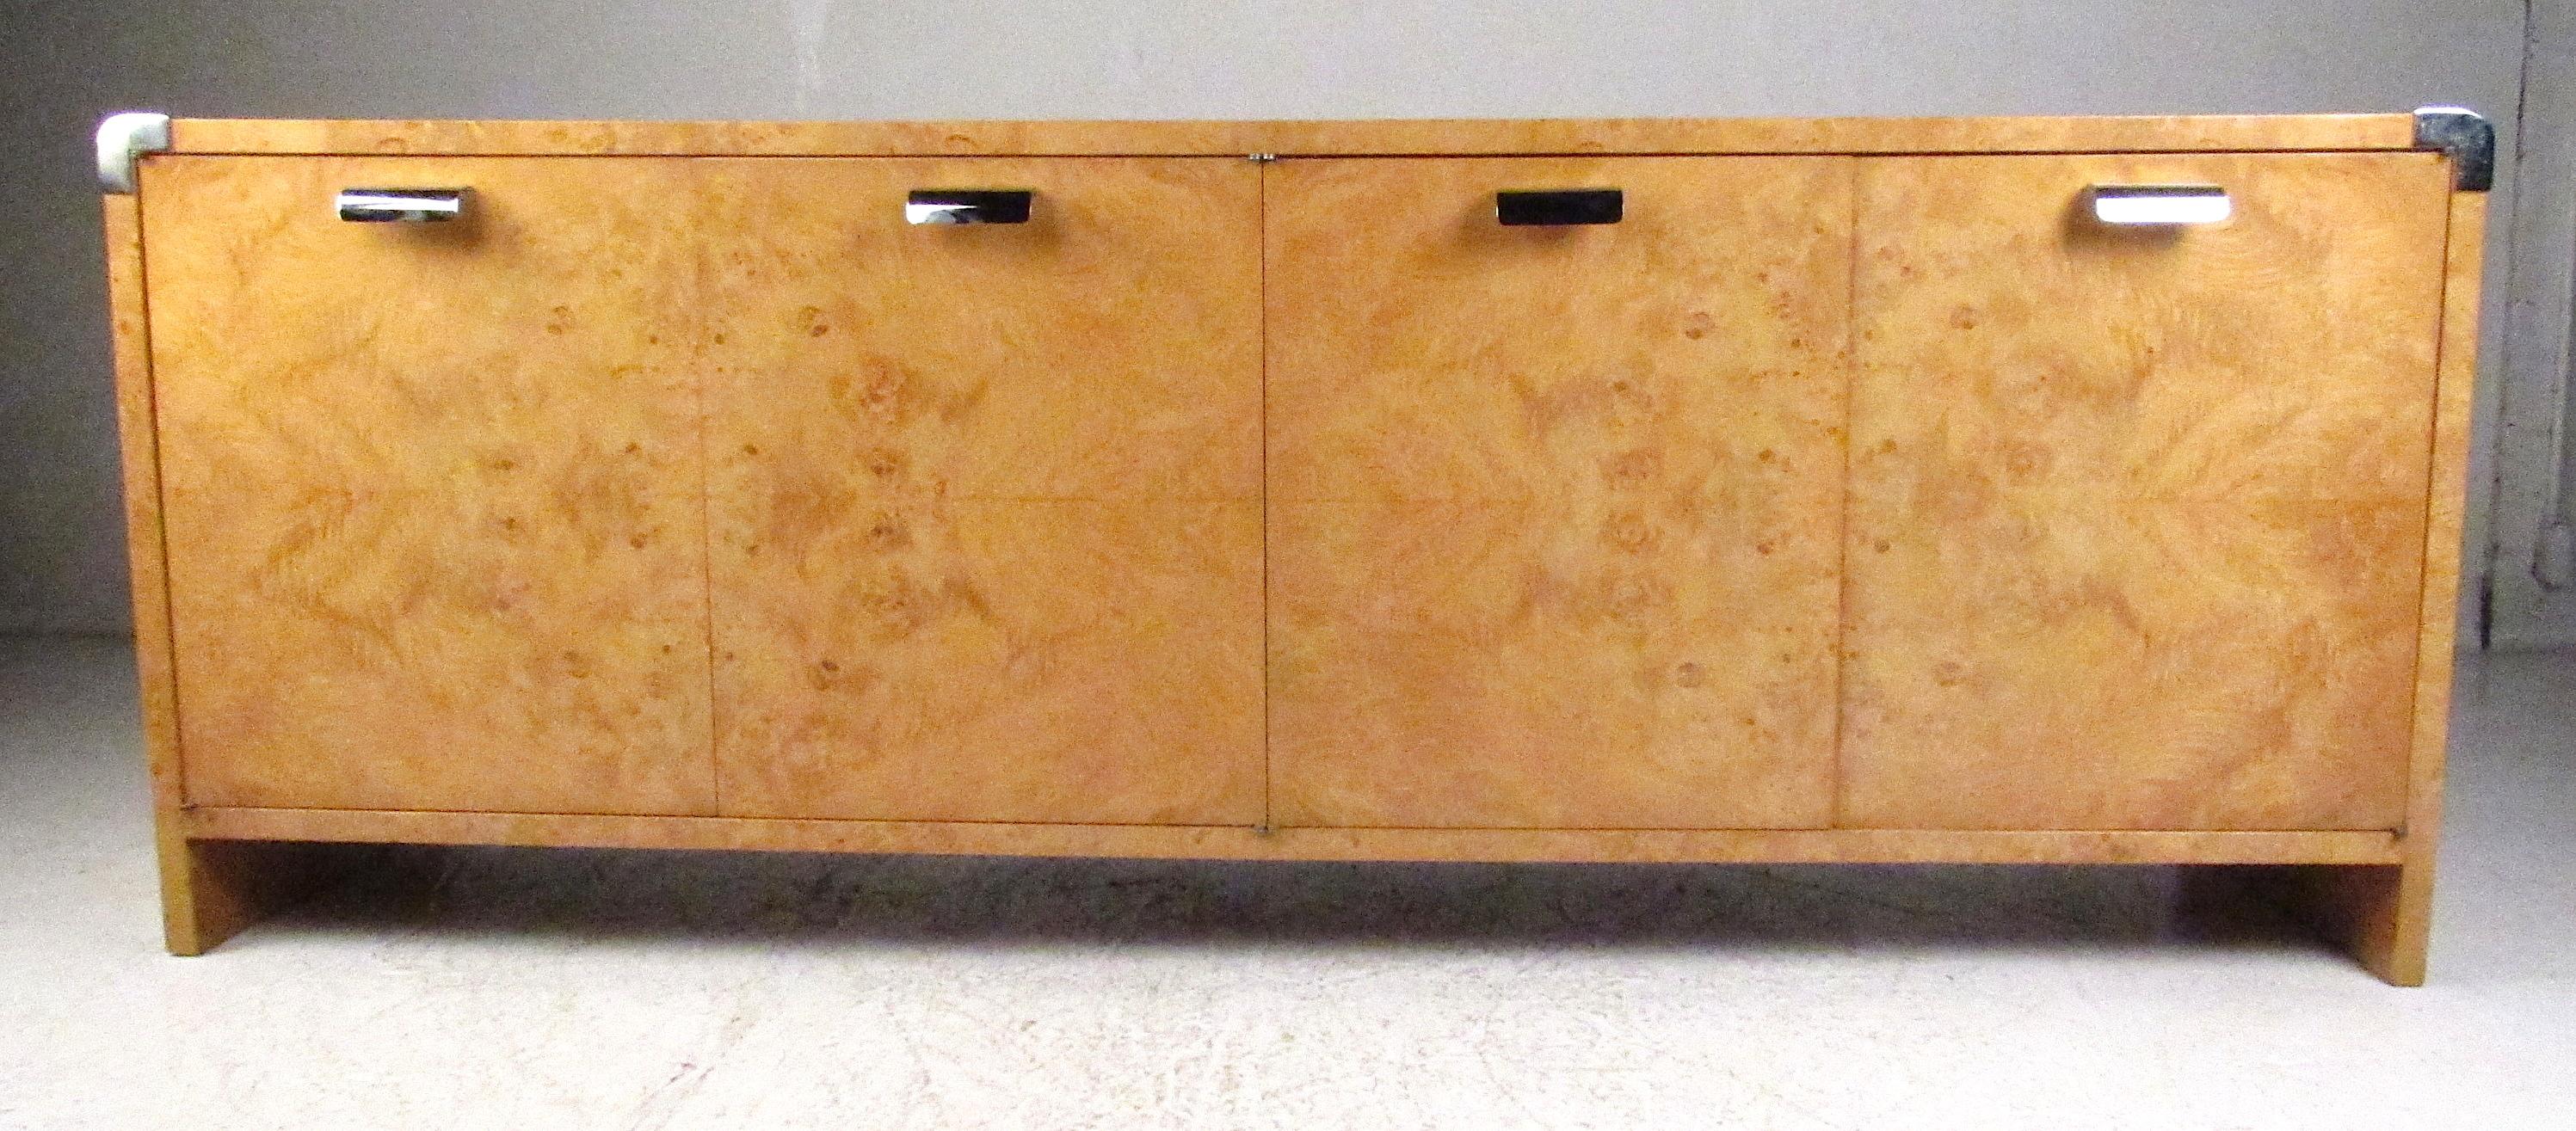 Beautiful four-door burl wood maple credenza with chrome accents in the style of Milo Baughman. One adjustable shelf on the left with three tray-storage drawers on the right make this a very functional and attractive storage option. Please confirm